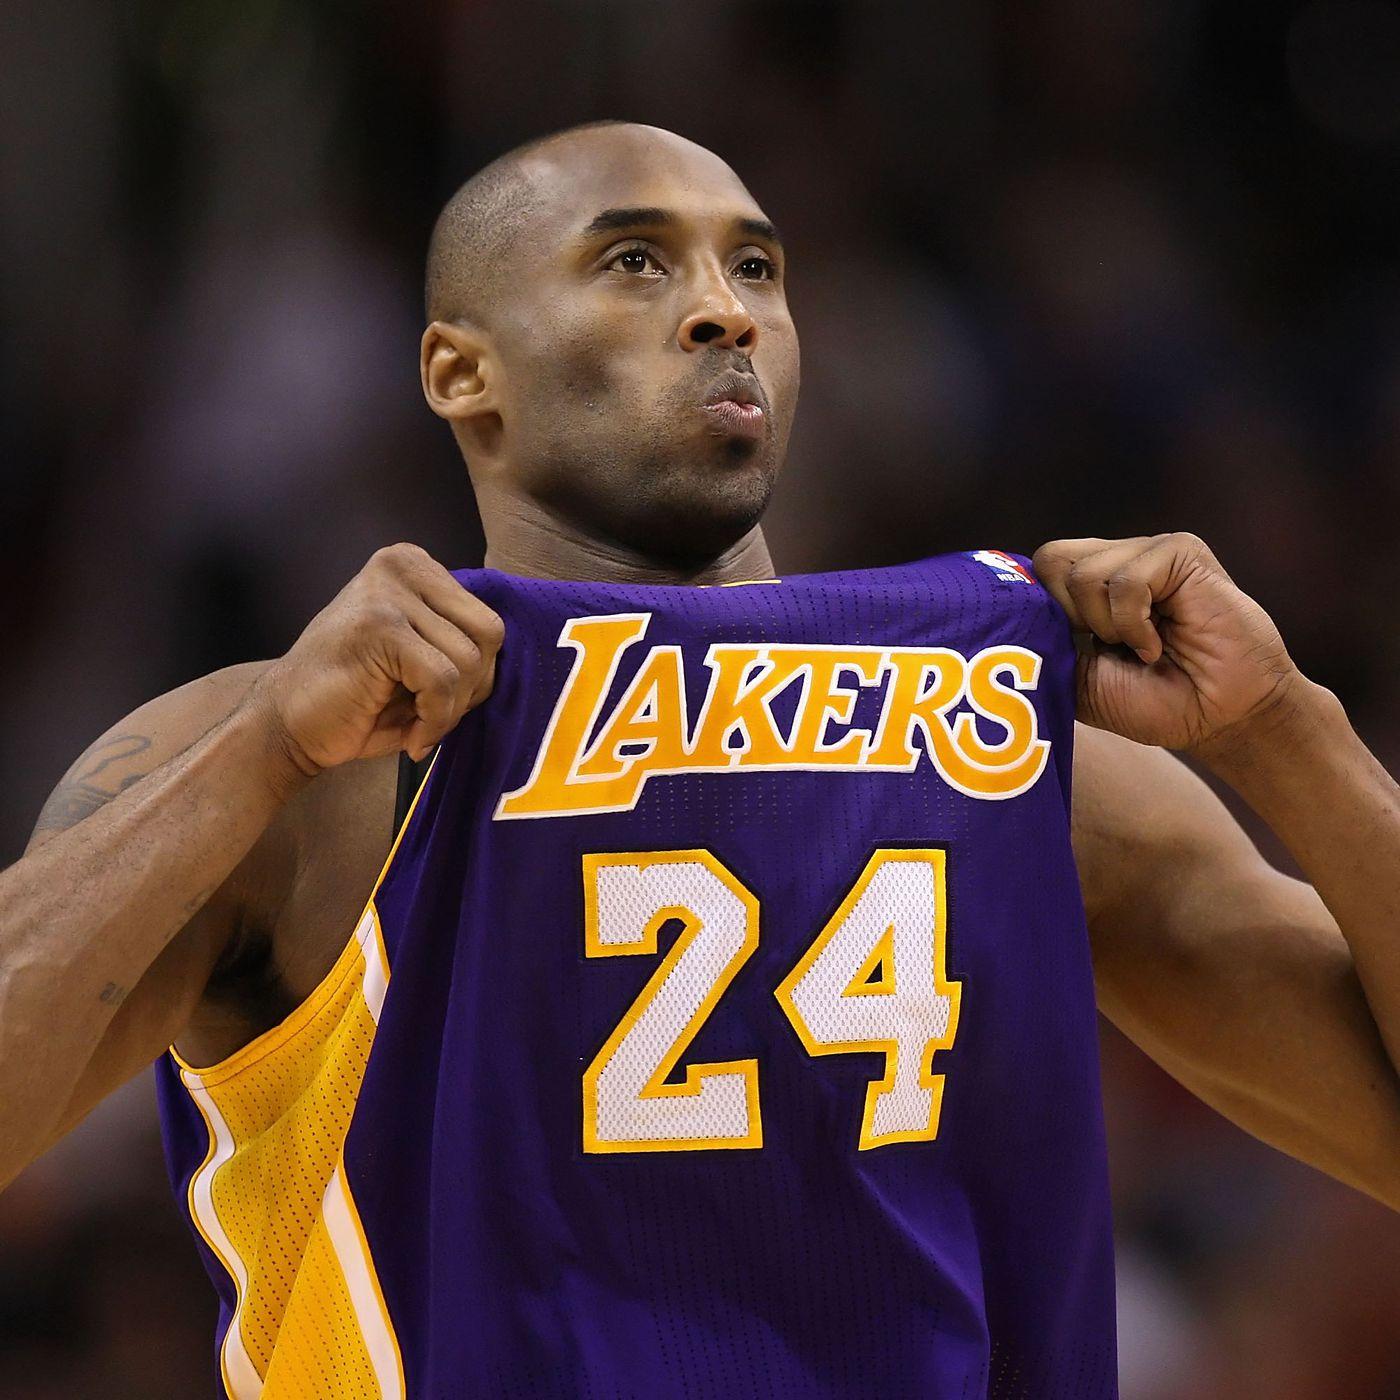 Twitter reacts to the passing of NBA legend Kobe Bryant